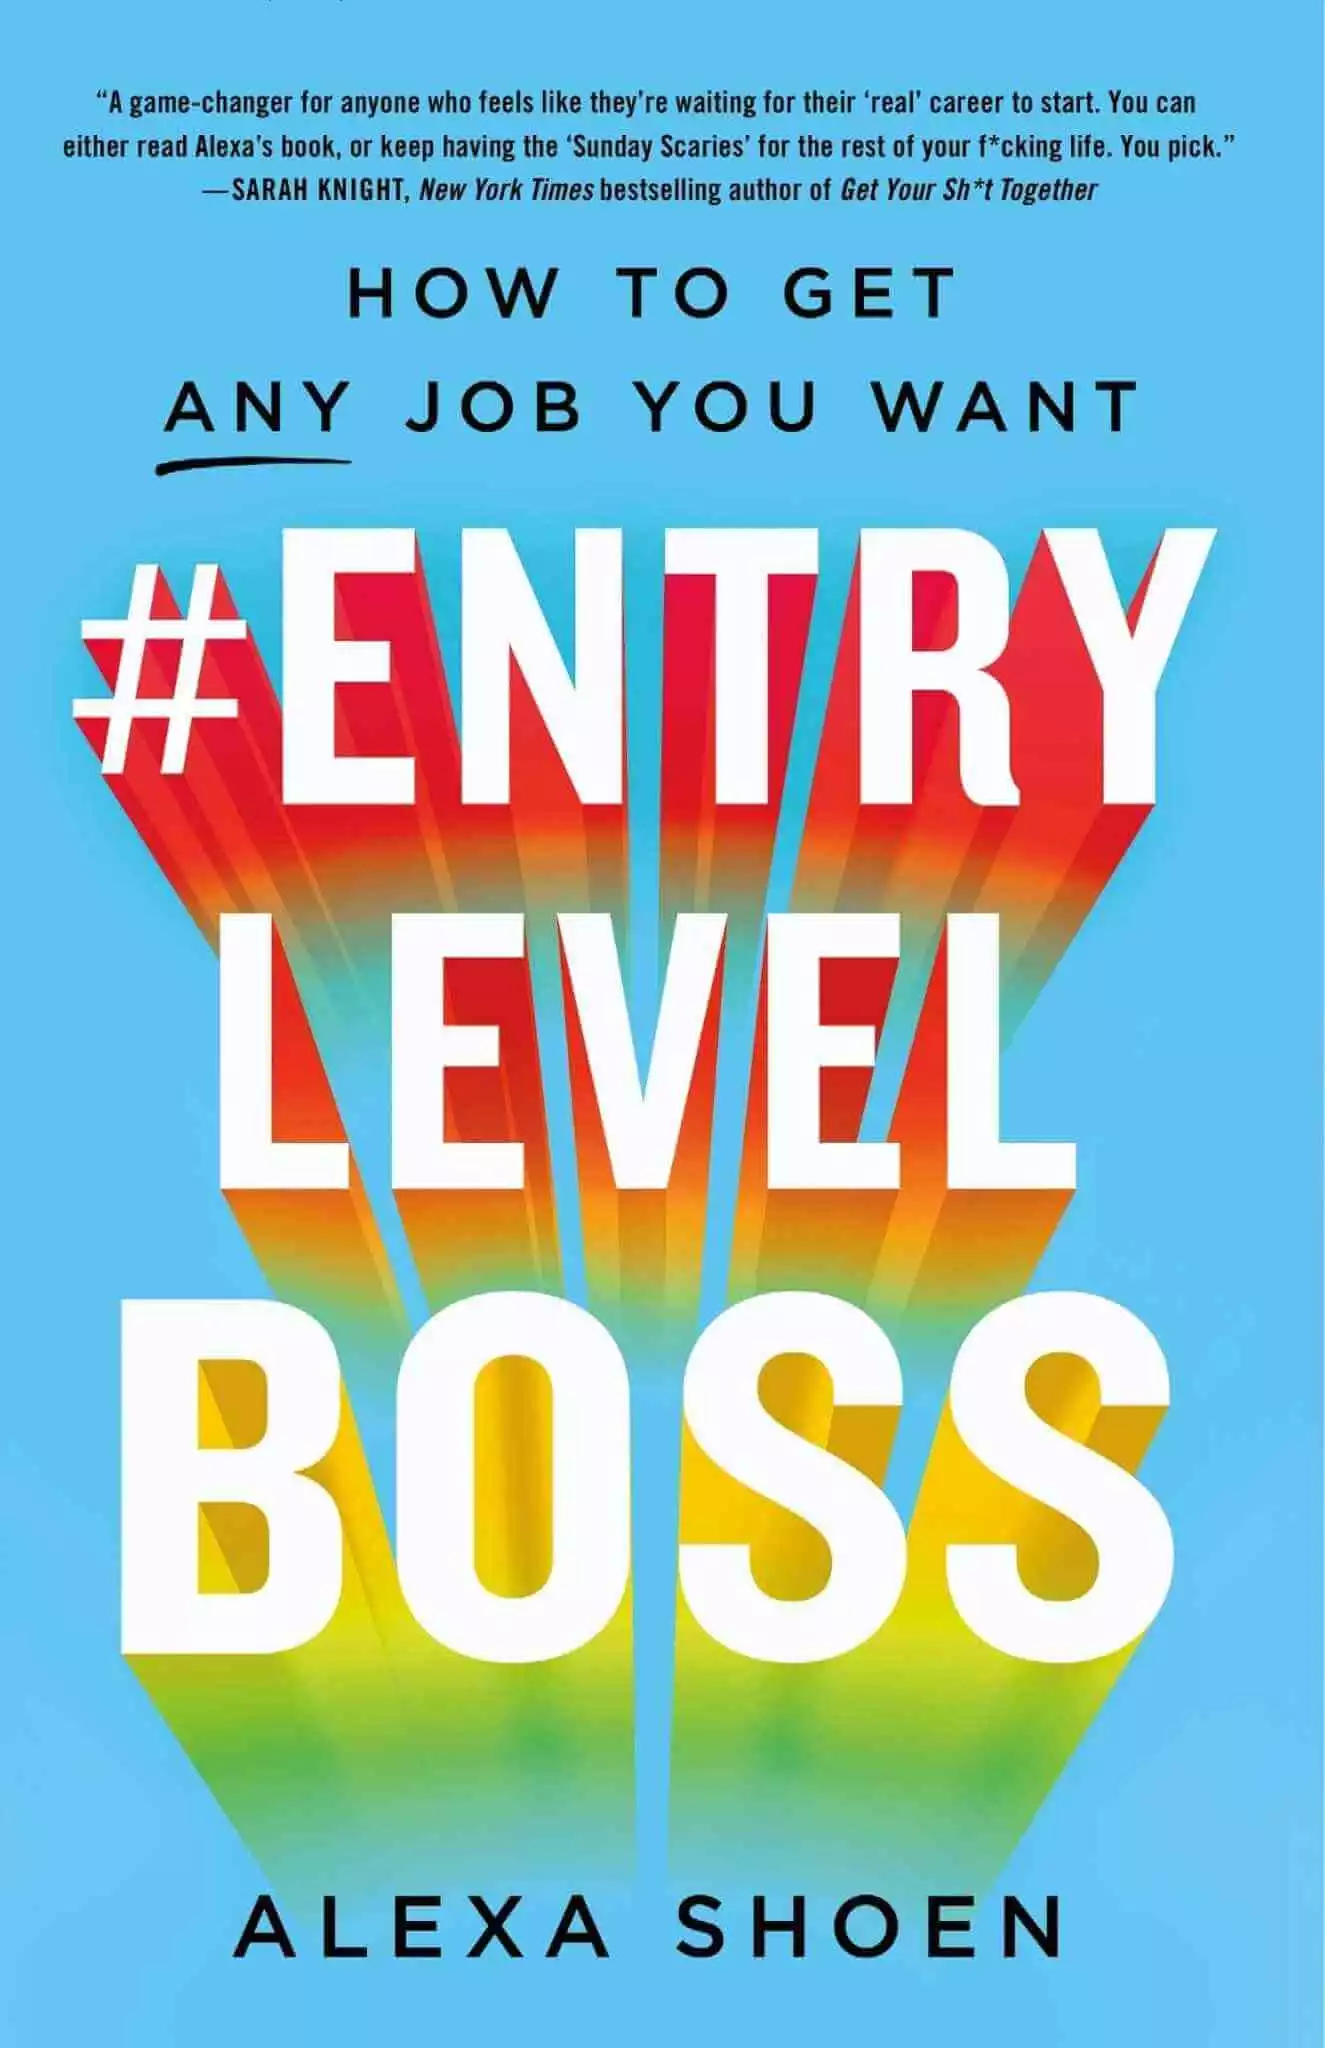 Entry Level Boss: How to Get Any Job You Want